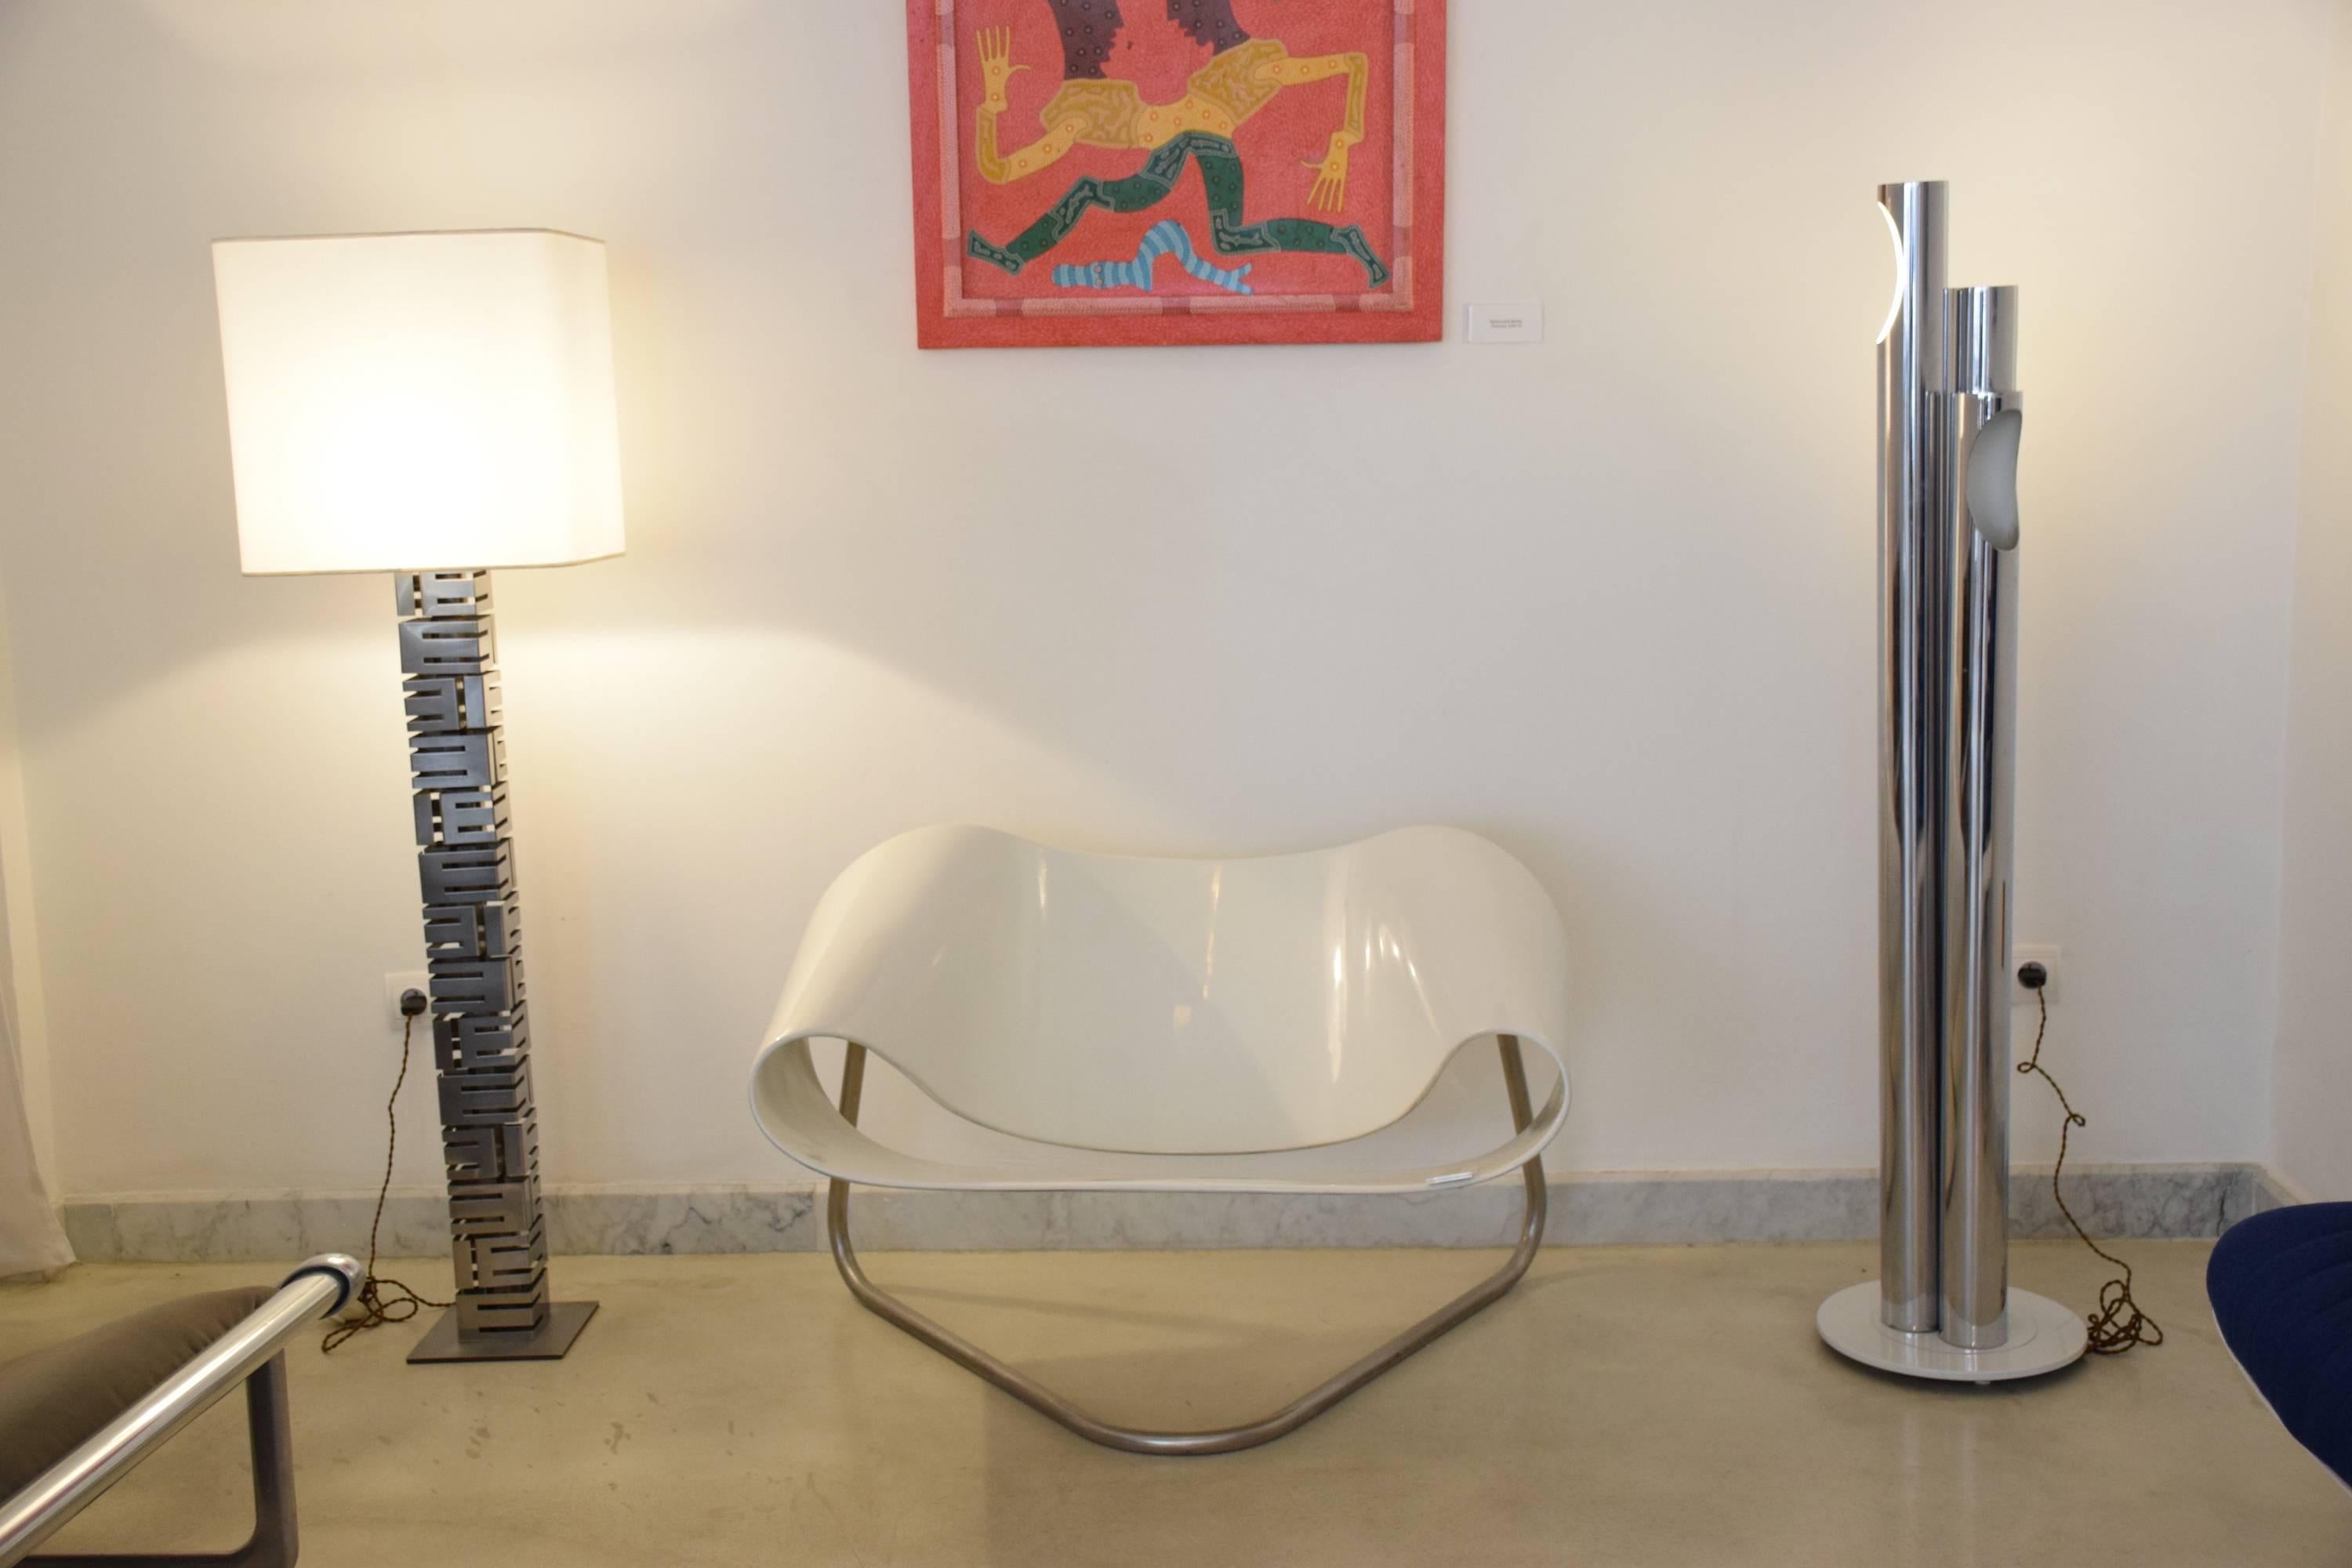 20th Century vintage silver building floor lamp designed and crafted by Curtis Jere in the 1970s, a duo highly praised for their sculptural metalwork.
This original edition is composed of folded chromed metallic sheets. Fully restored with a new